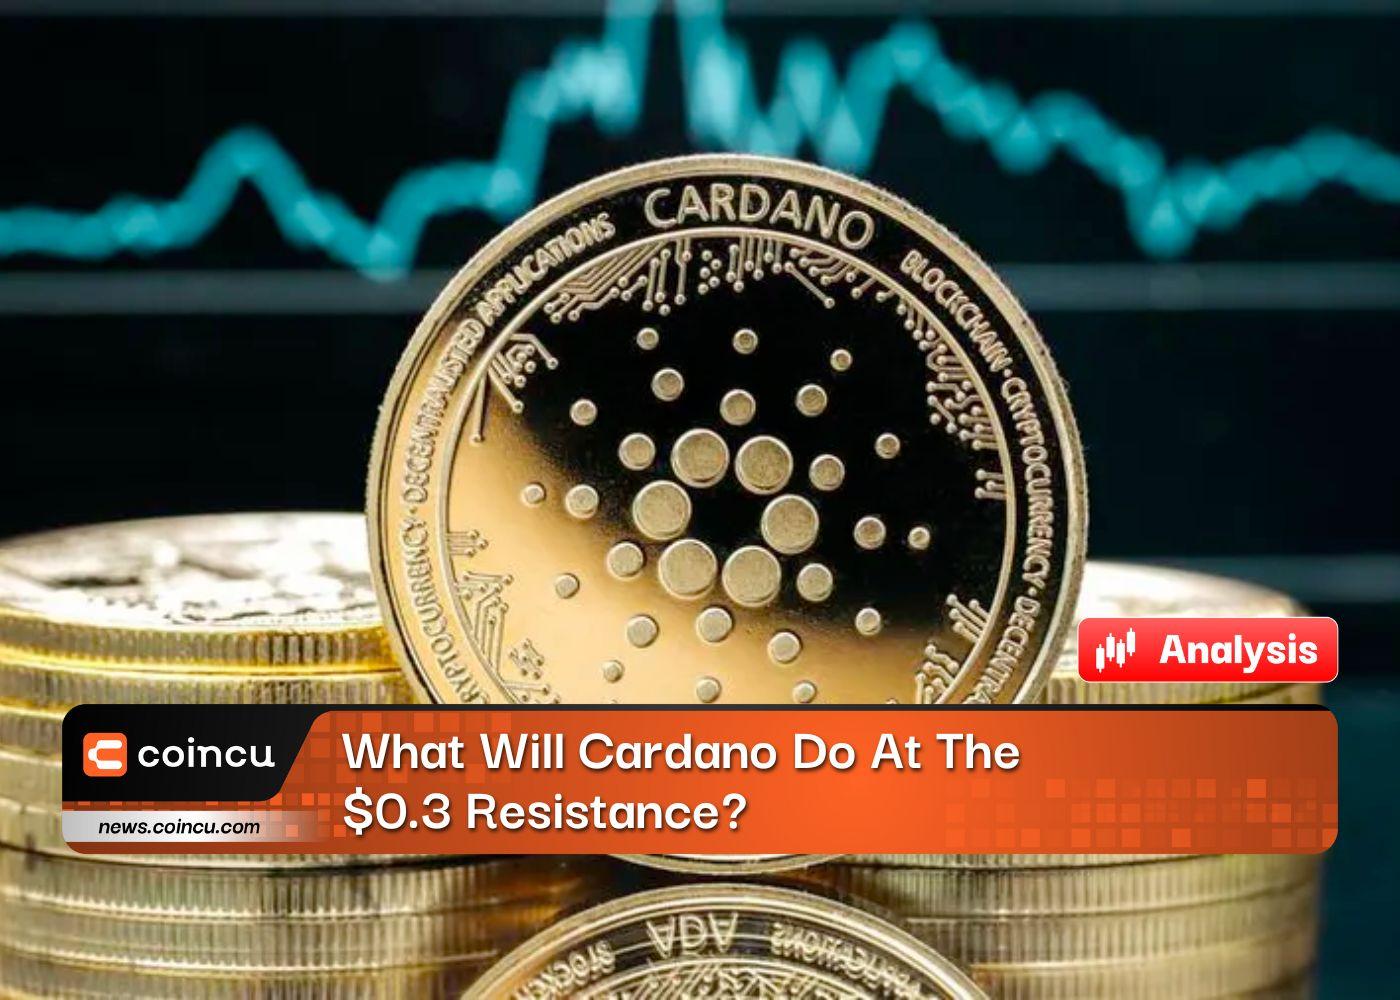 What Will Cardano Do At The $0.3 Resistance?